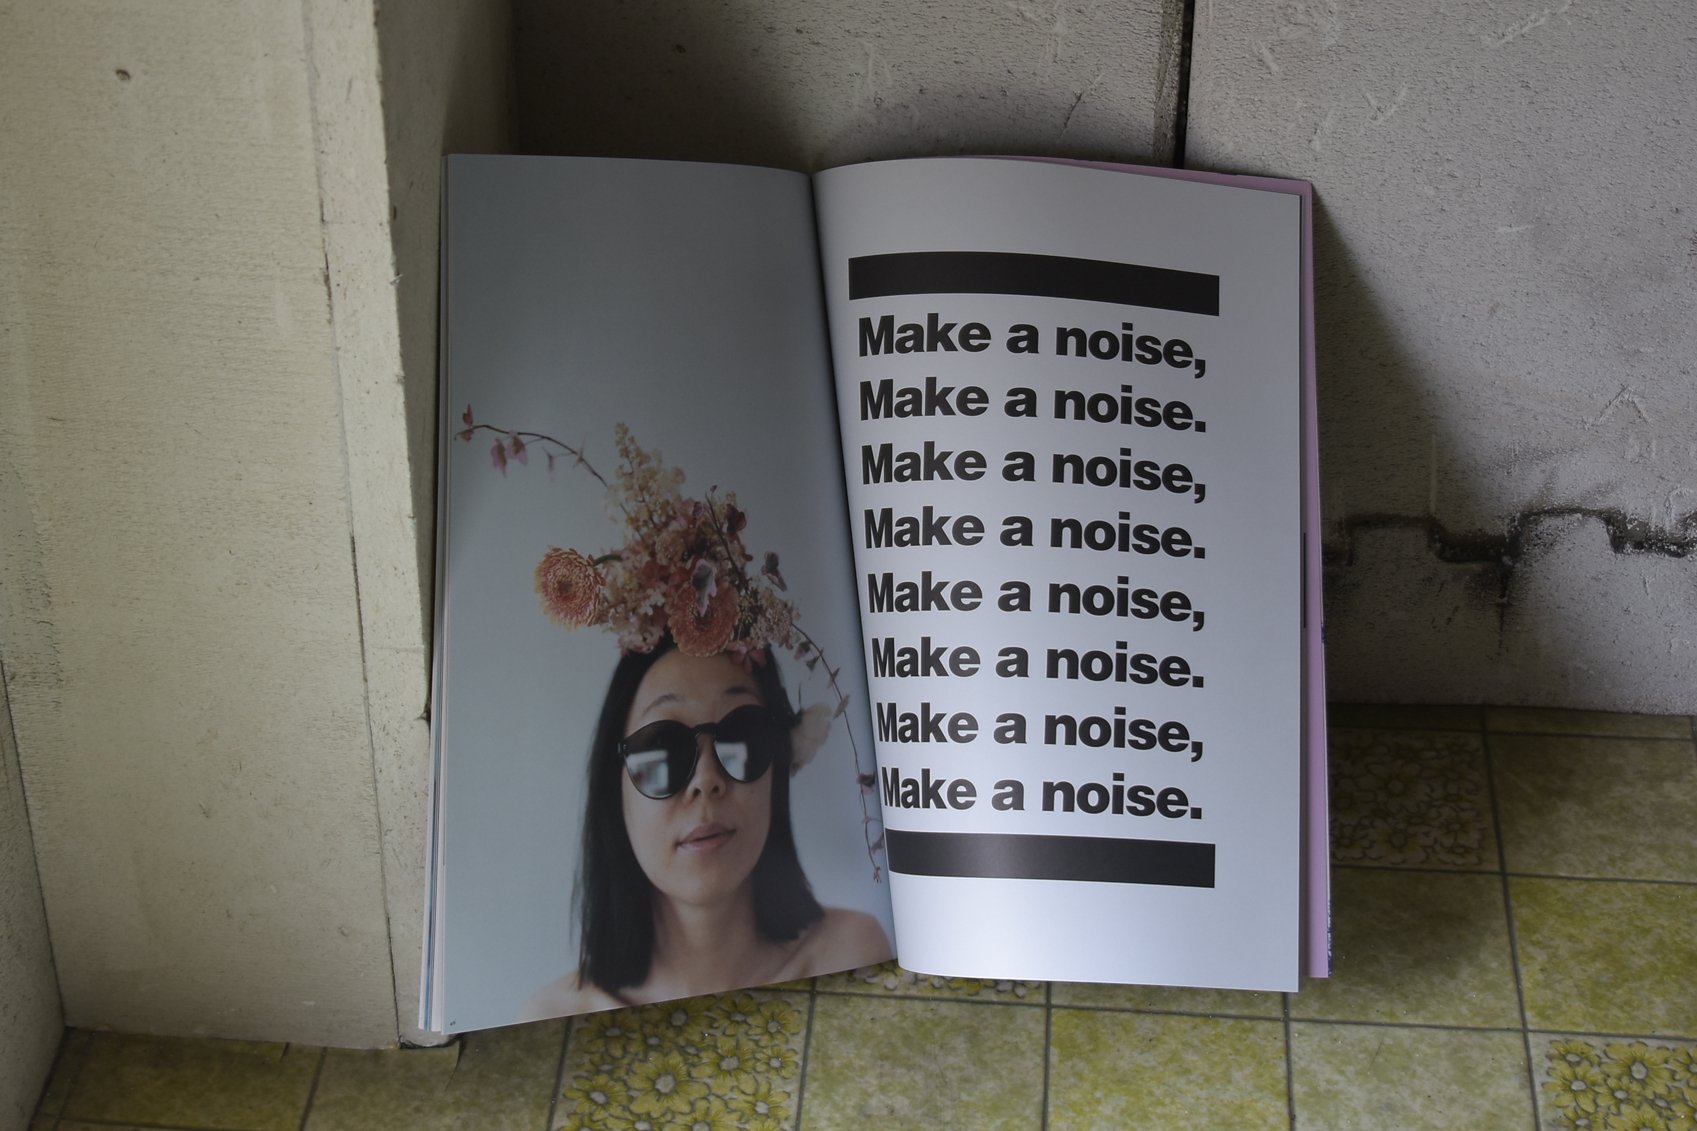 MAKE A NOISE productions（メイカノイズプロダクションズ）